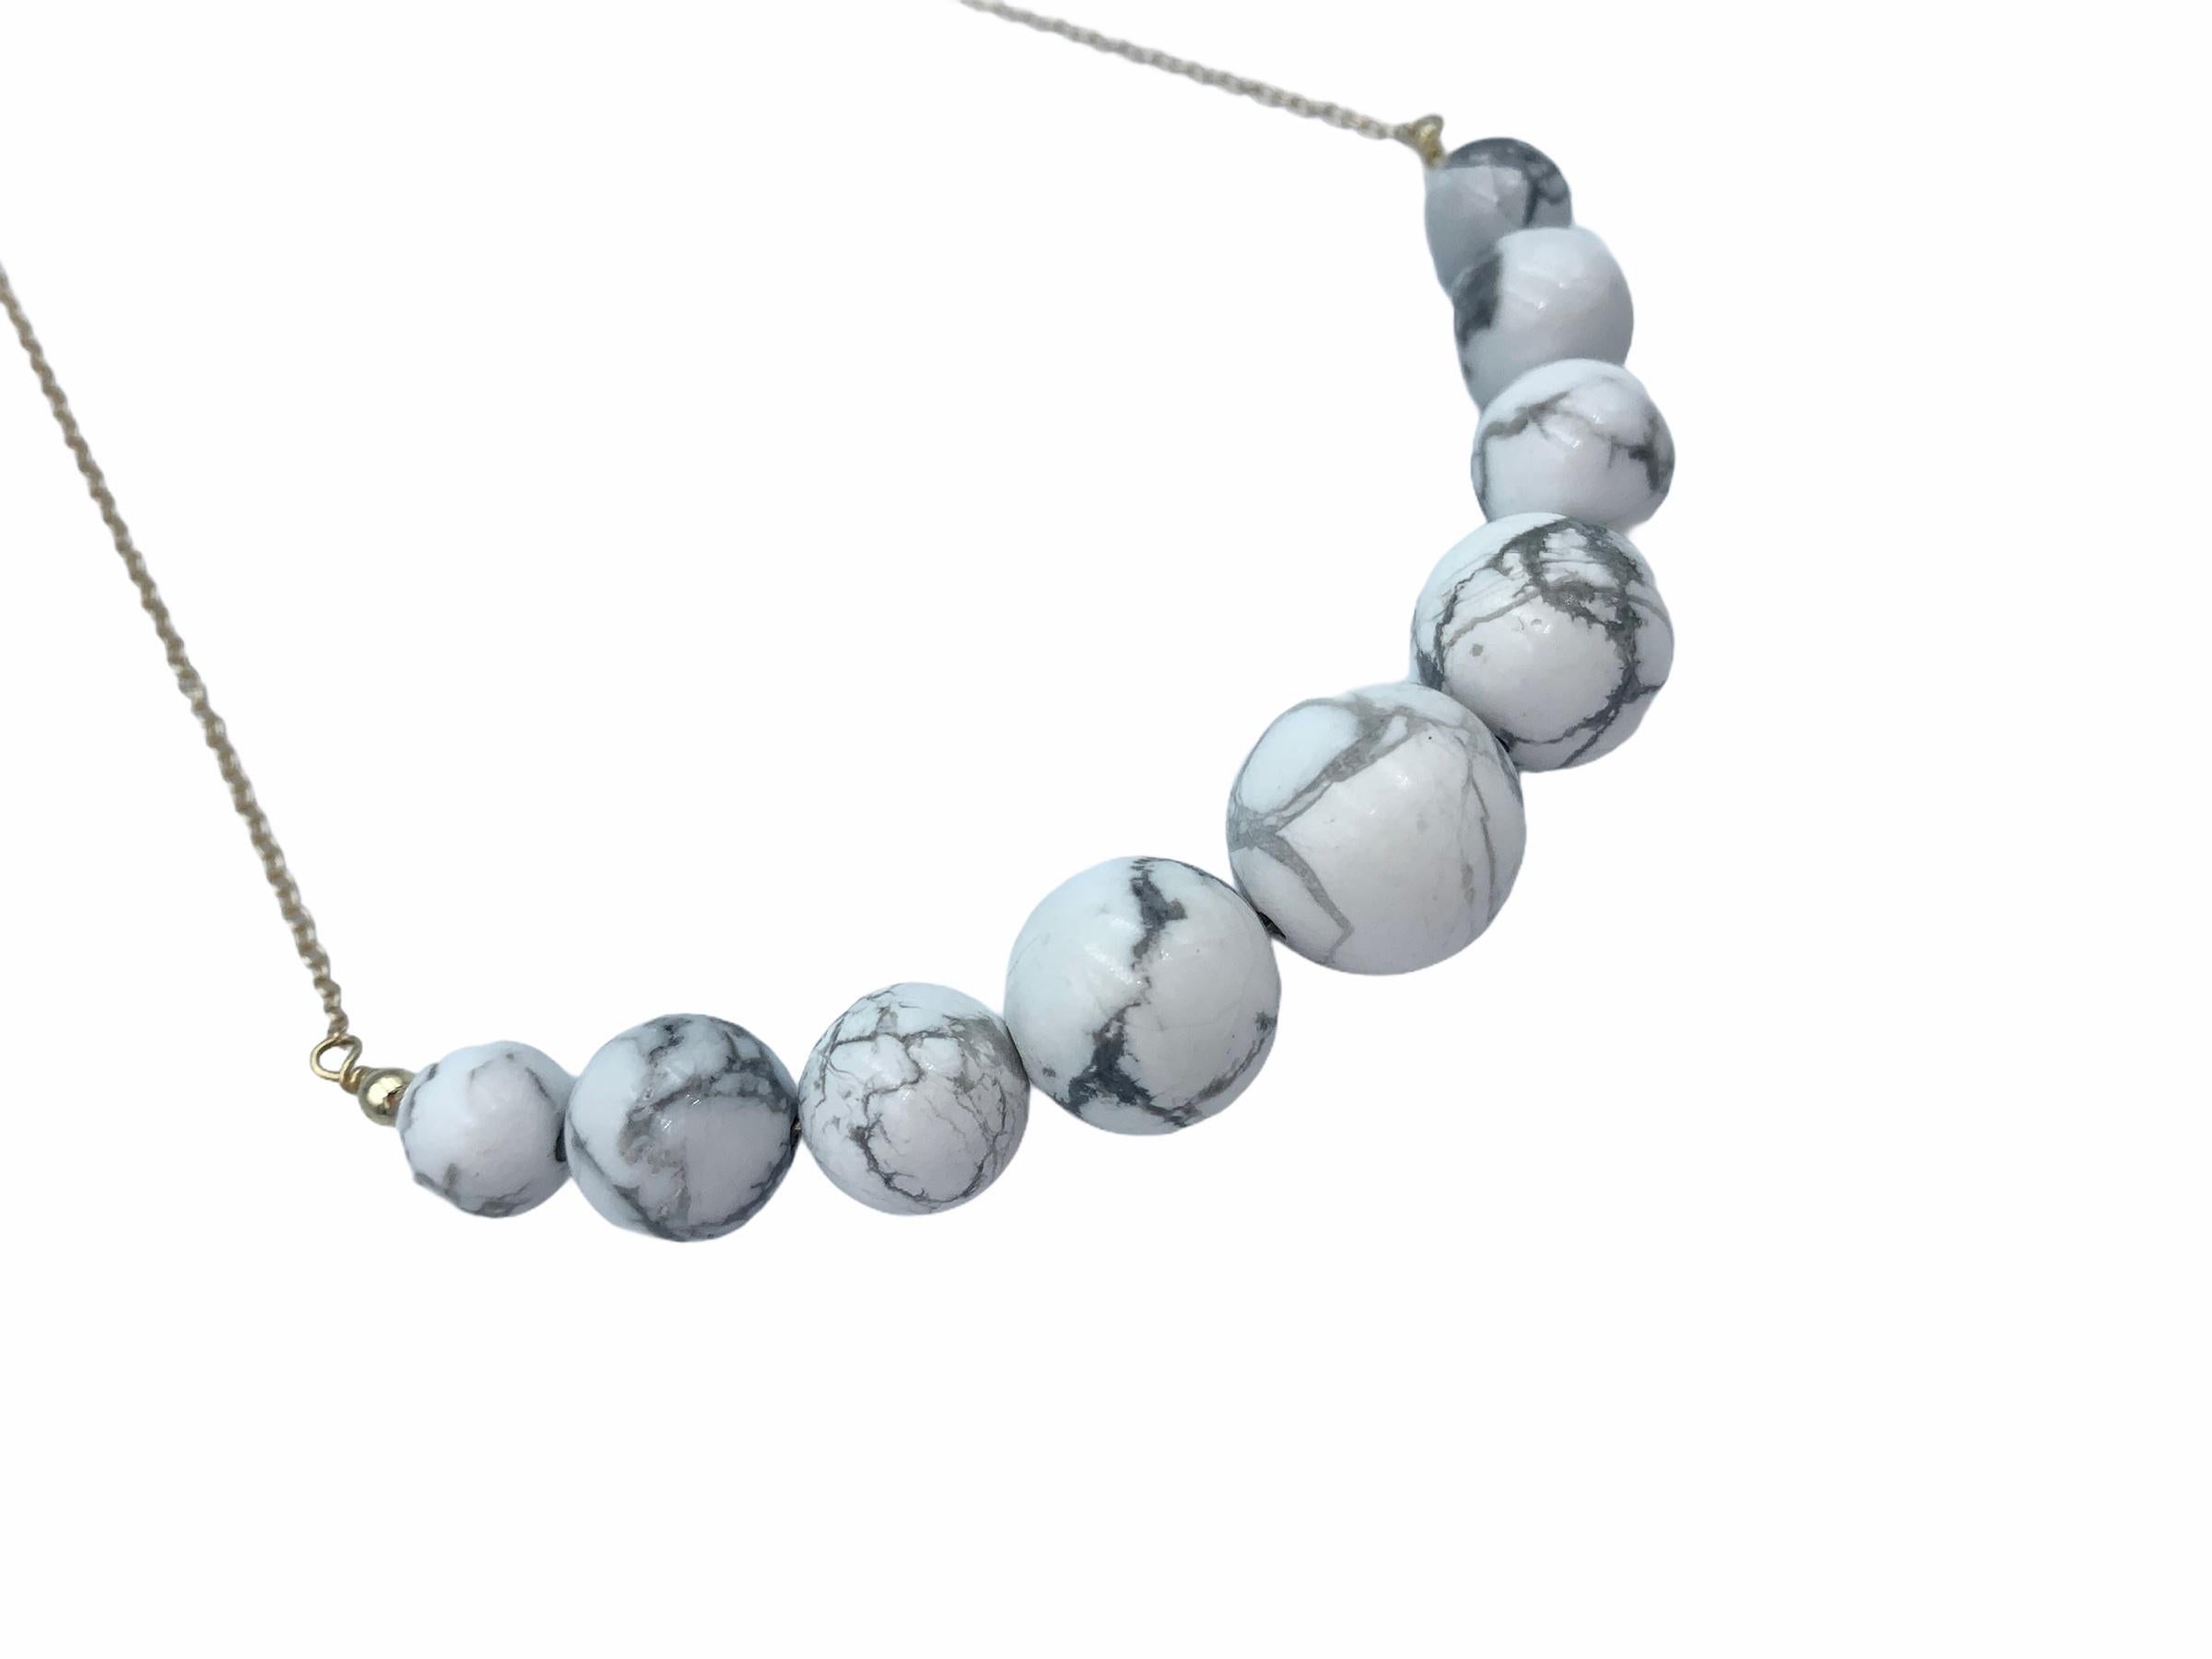 Hand made using 14 carat Yellow Gold, the suspended Howlite beads are threaded together with a solid gold wire and graduated onto a delicate 1.3 mm cable chain. The white veined beads which also go by 